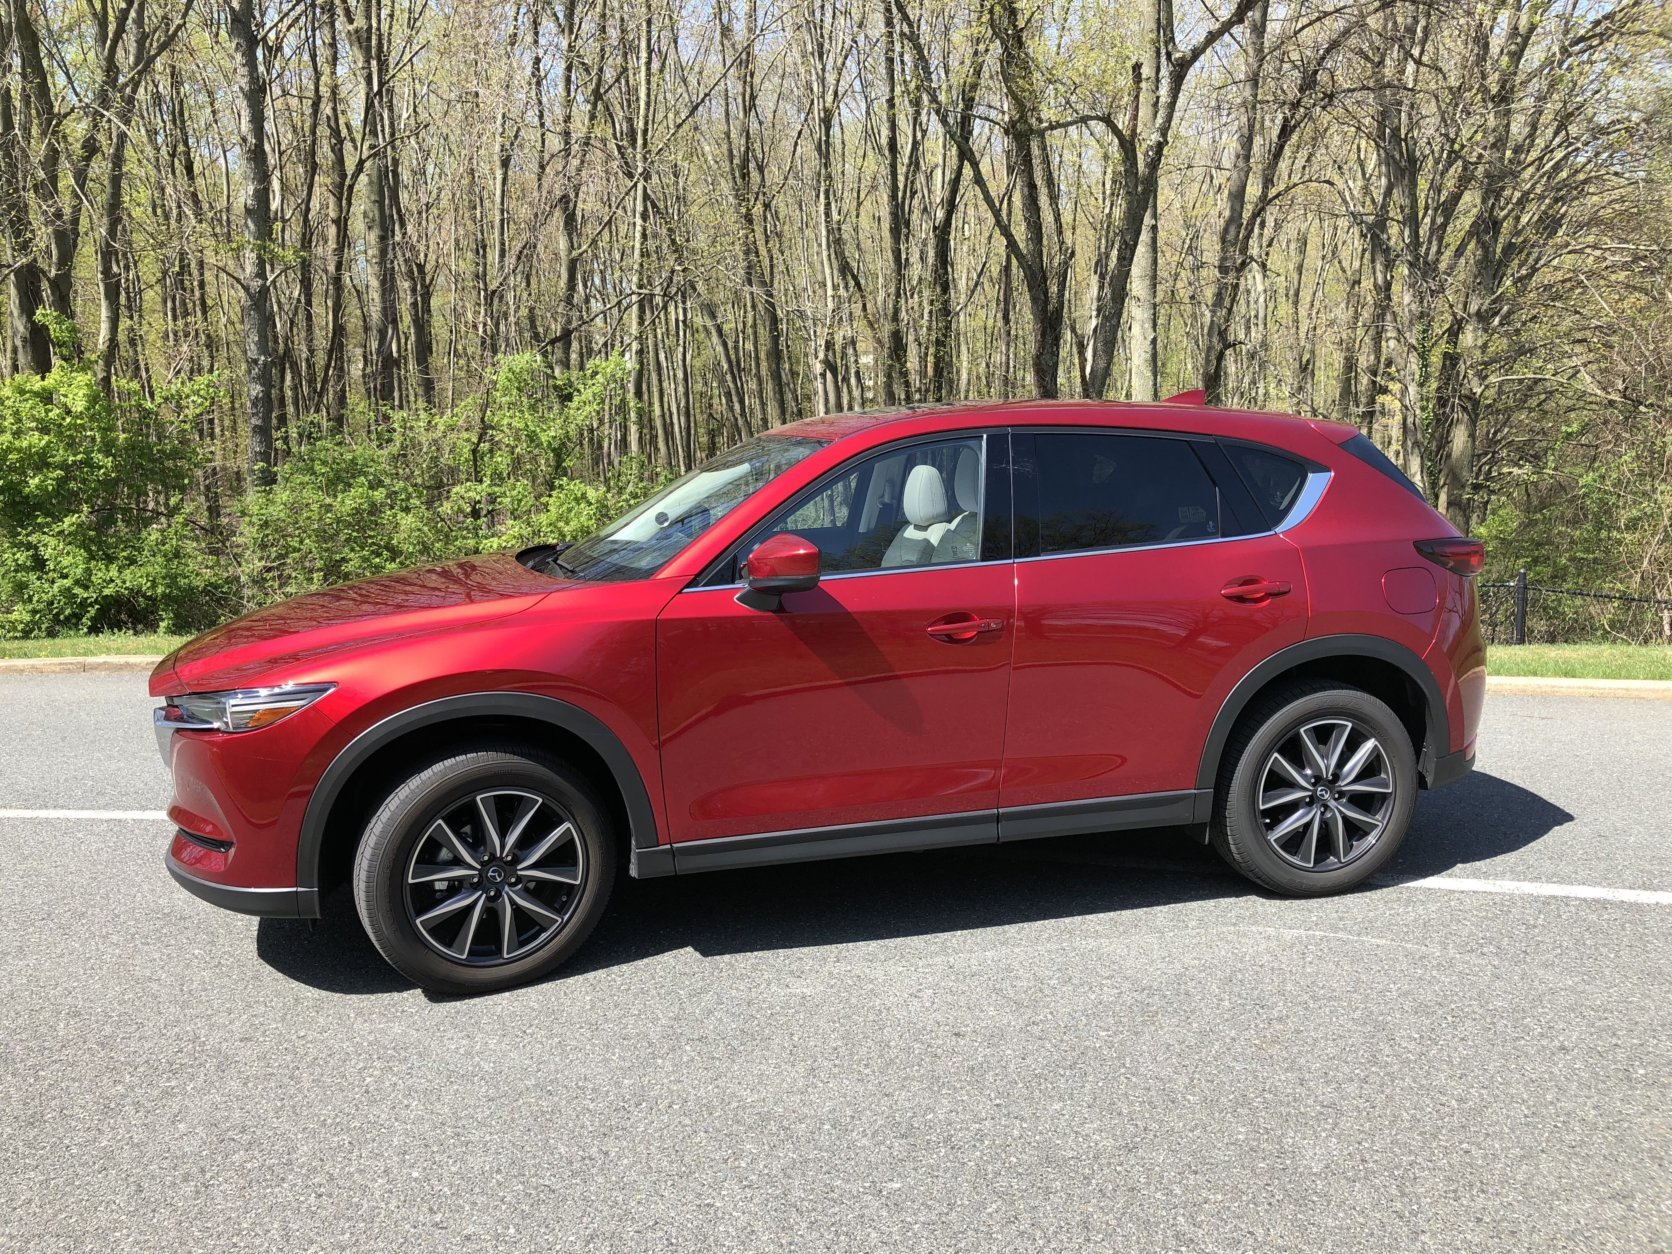 The CX-5 has seen some upgrades this year including stylish 19-inch wheels that go along with the new front end styling from last year. (WTOP/Mike Parris)